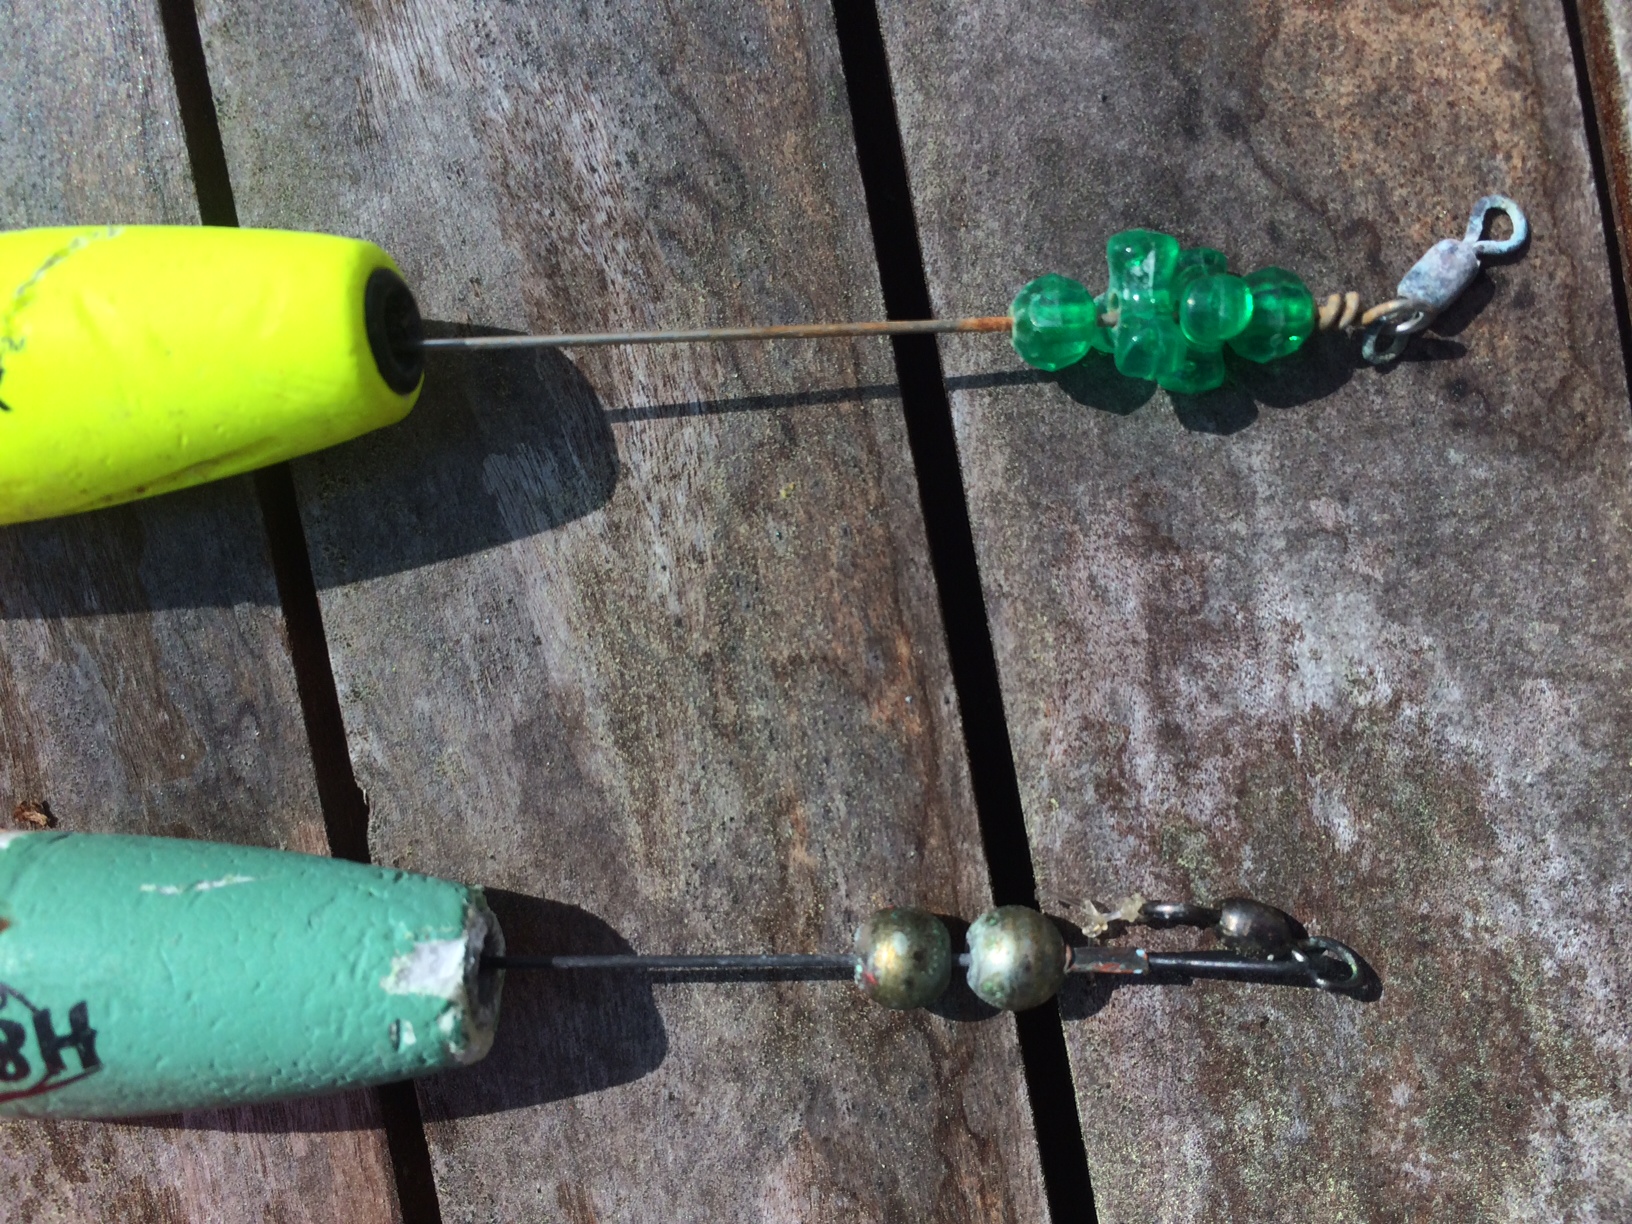 Basic Trout Fishing – How To Rig A Jig Under A Big Bend, 53% OFF